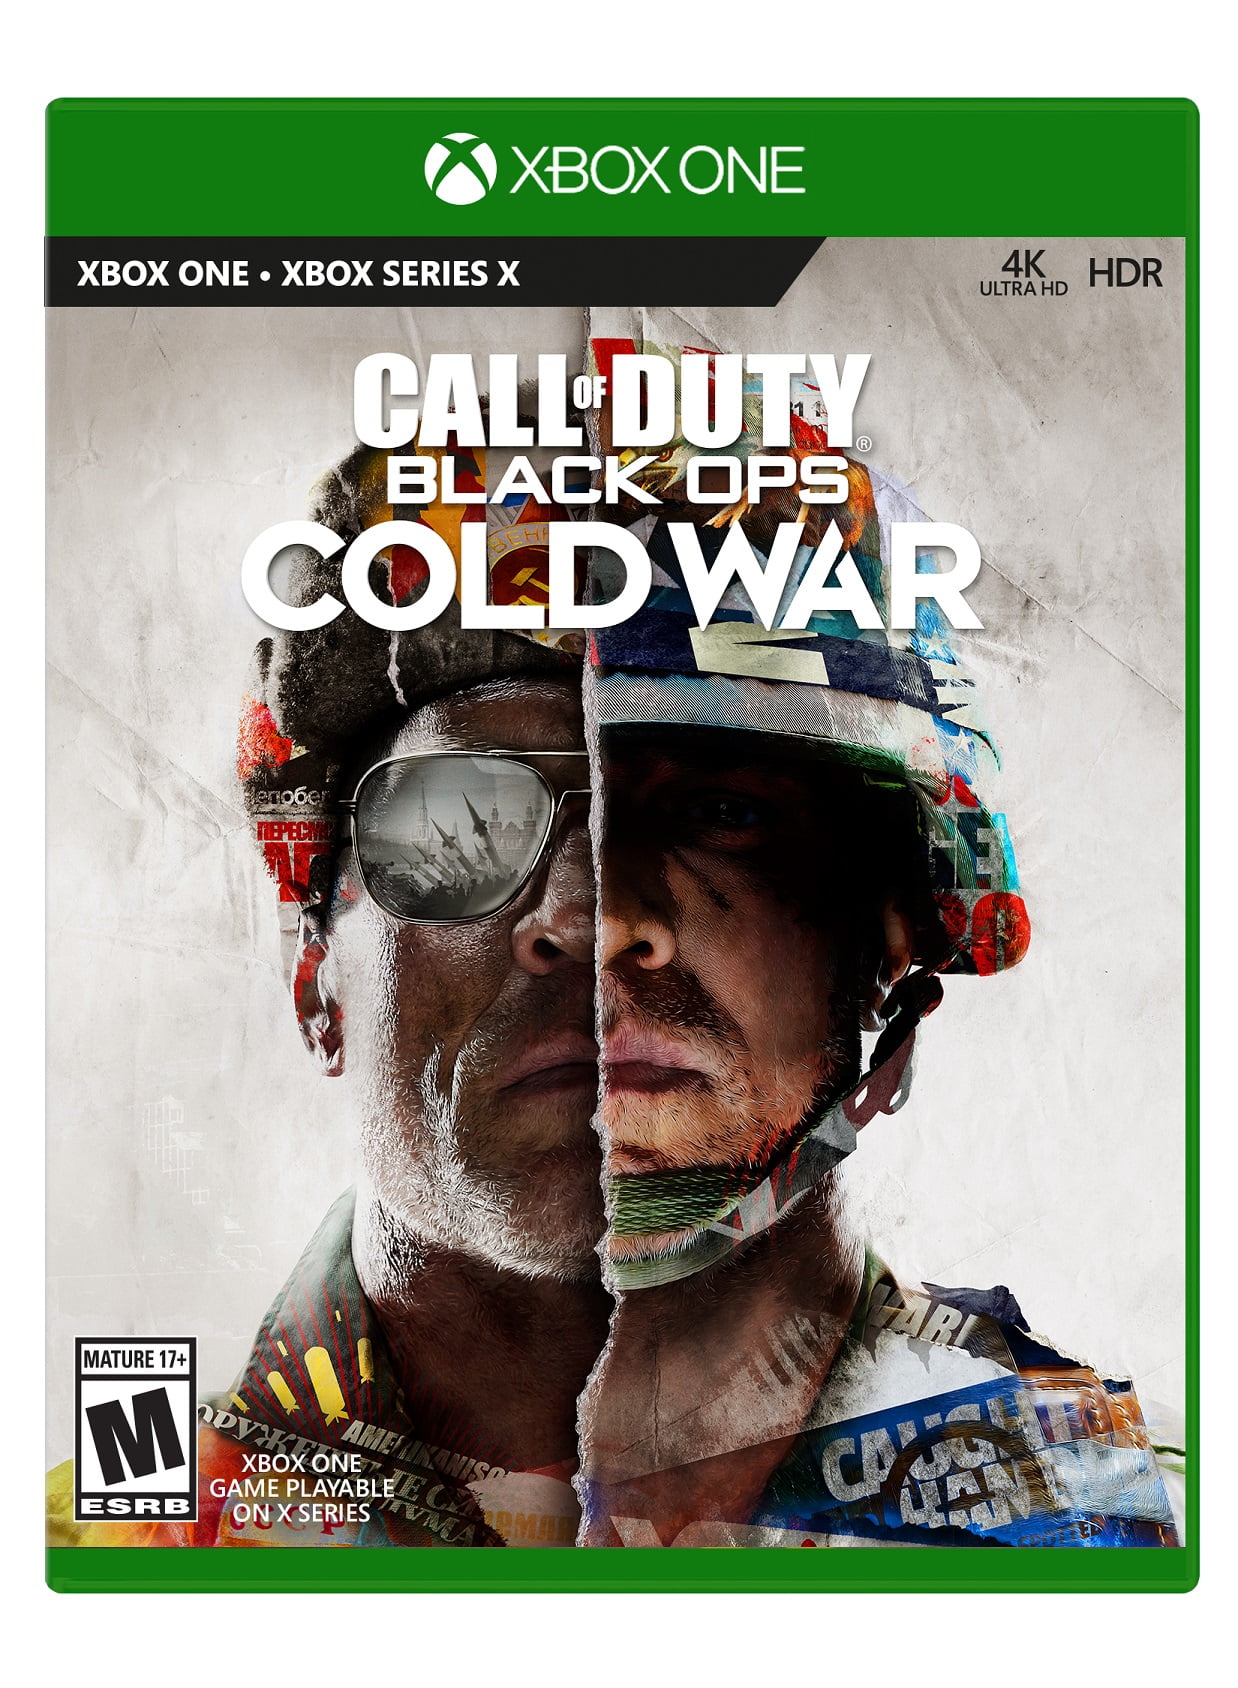 YMMV Call of Duty: Black Ops Cold War - Xbox One, Xbox Series X $30